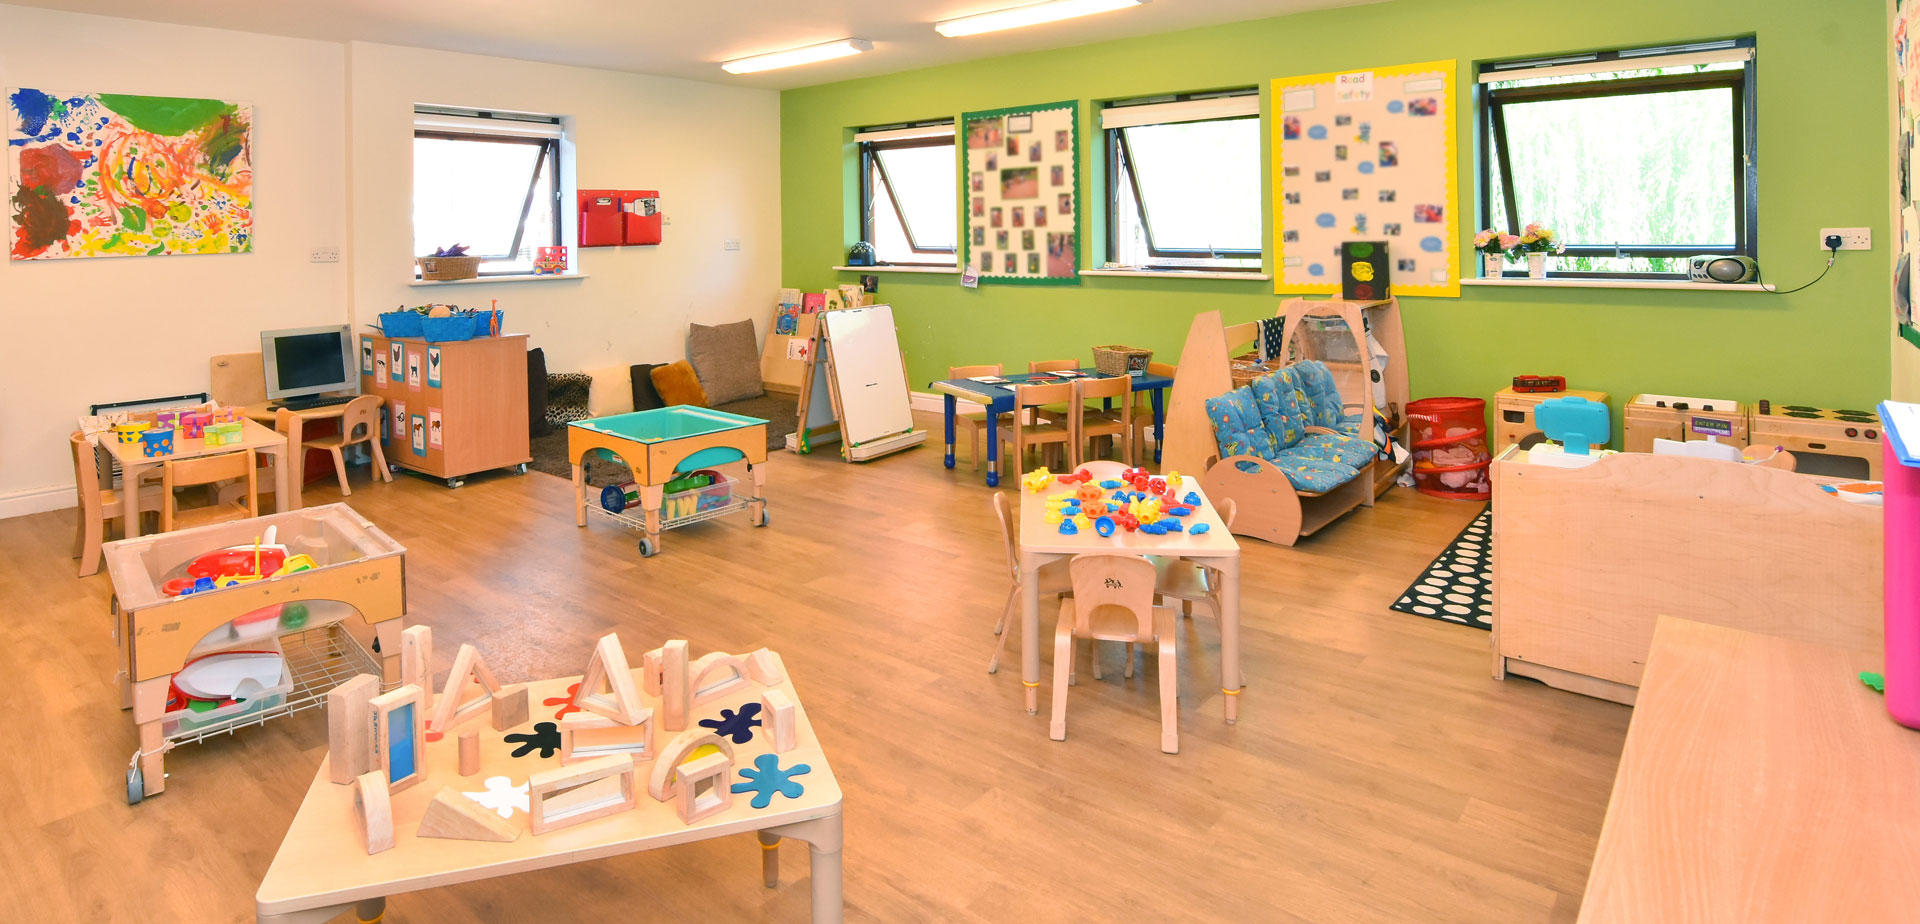 Bright Horizons Tooting Looking Glass Day Nursery and Preschool Tooting Bec 03339 203081